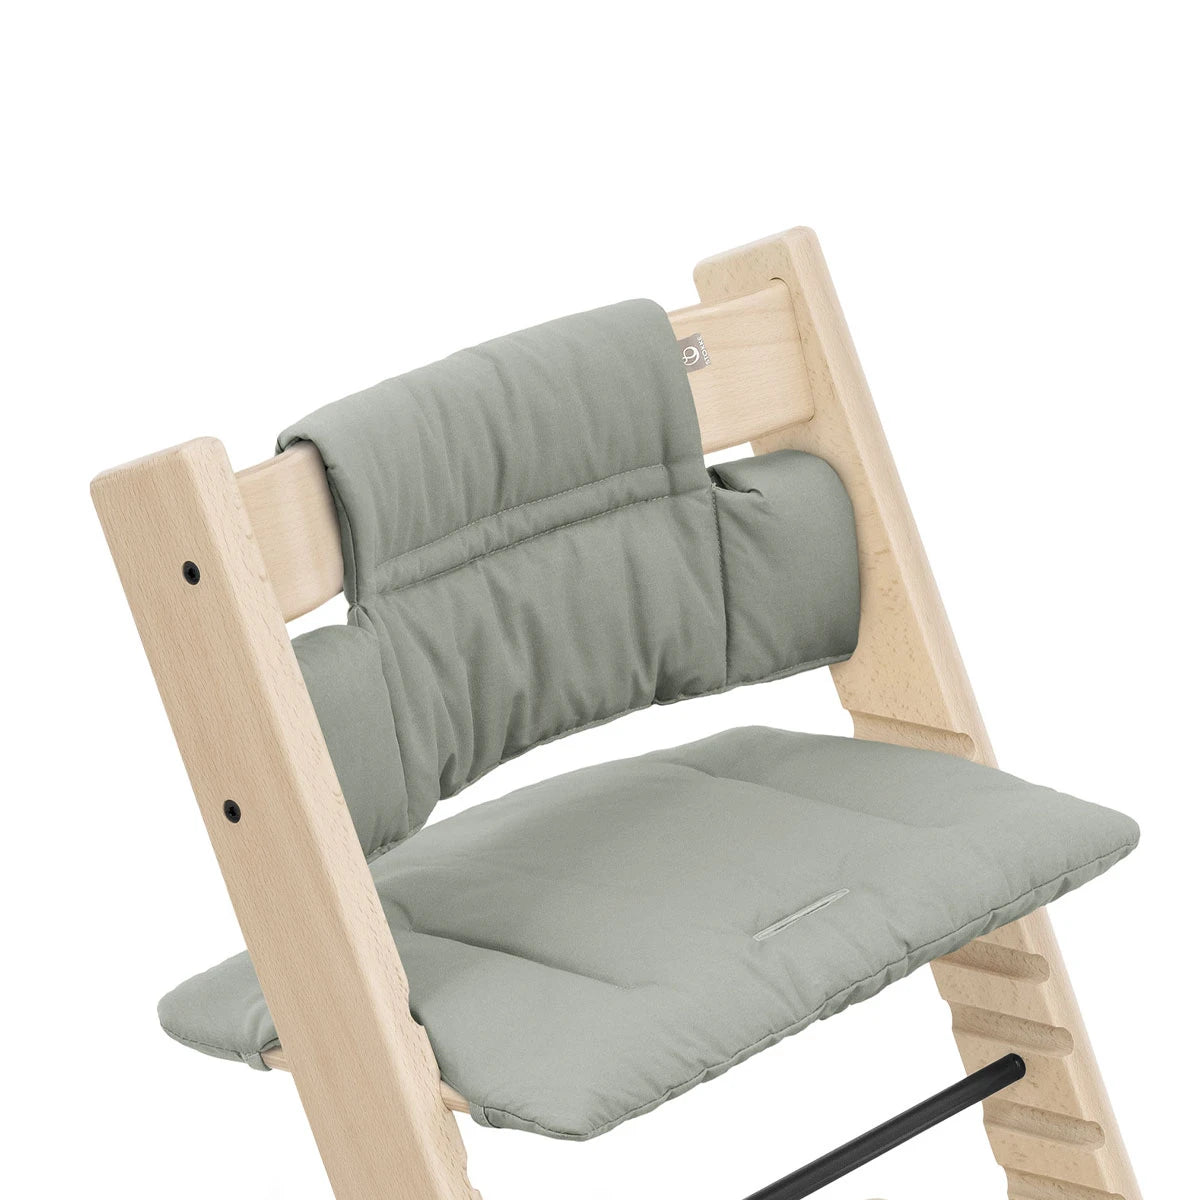 Stokke High Chairs & Booster Seats Glacier Green Stokke Tripp Trapp® Classic Cushion